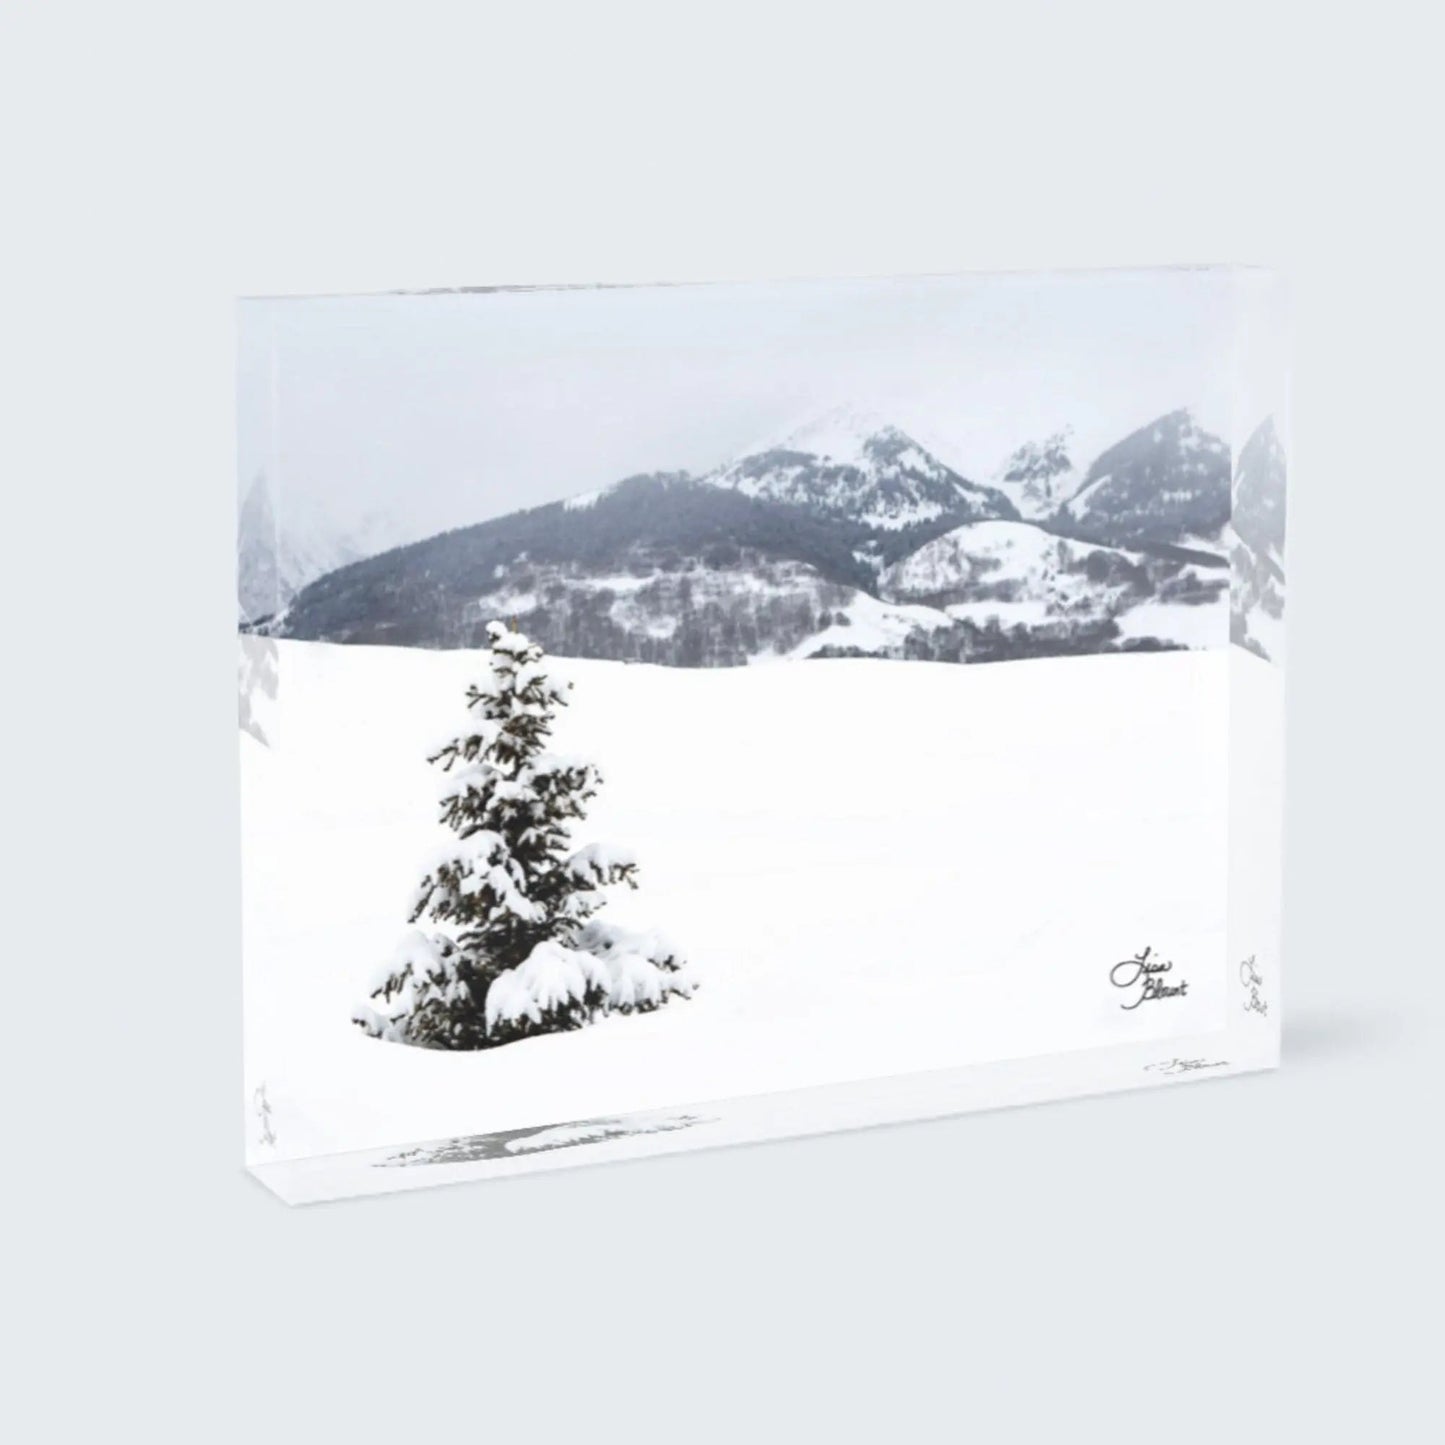 Snow covered pine tree standing alone on a hill art in an acrylic block